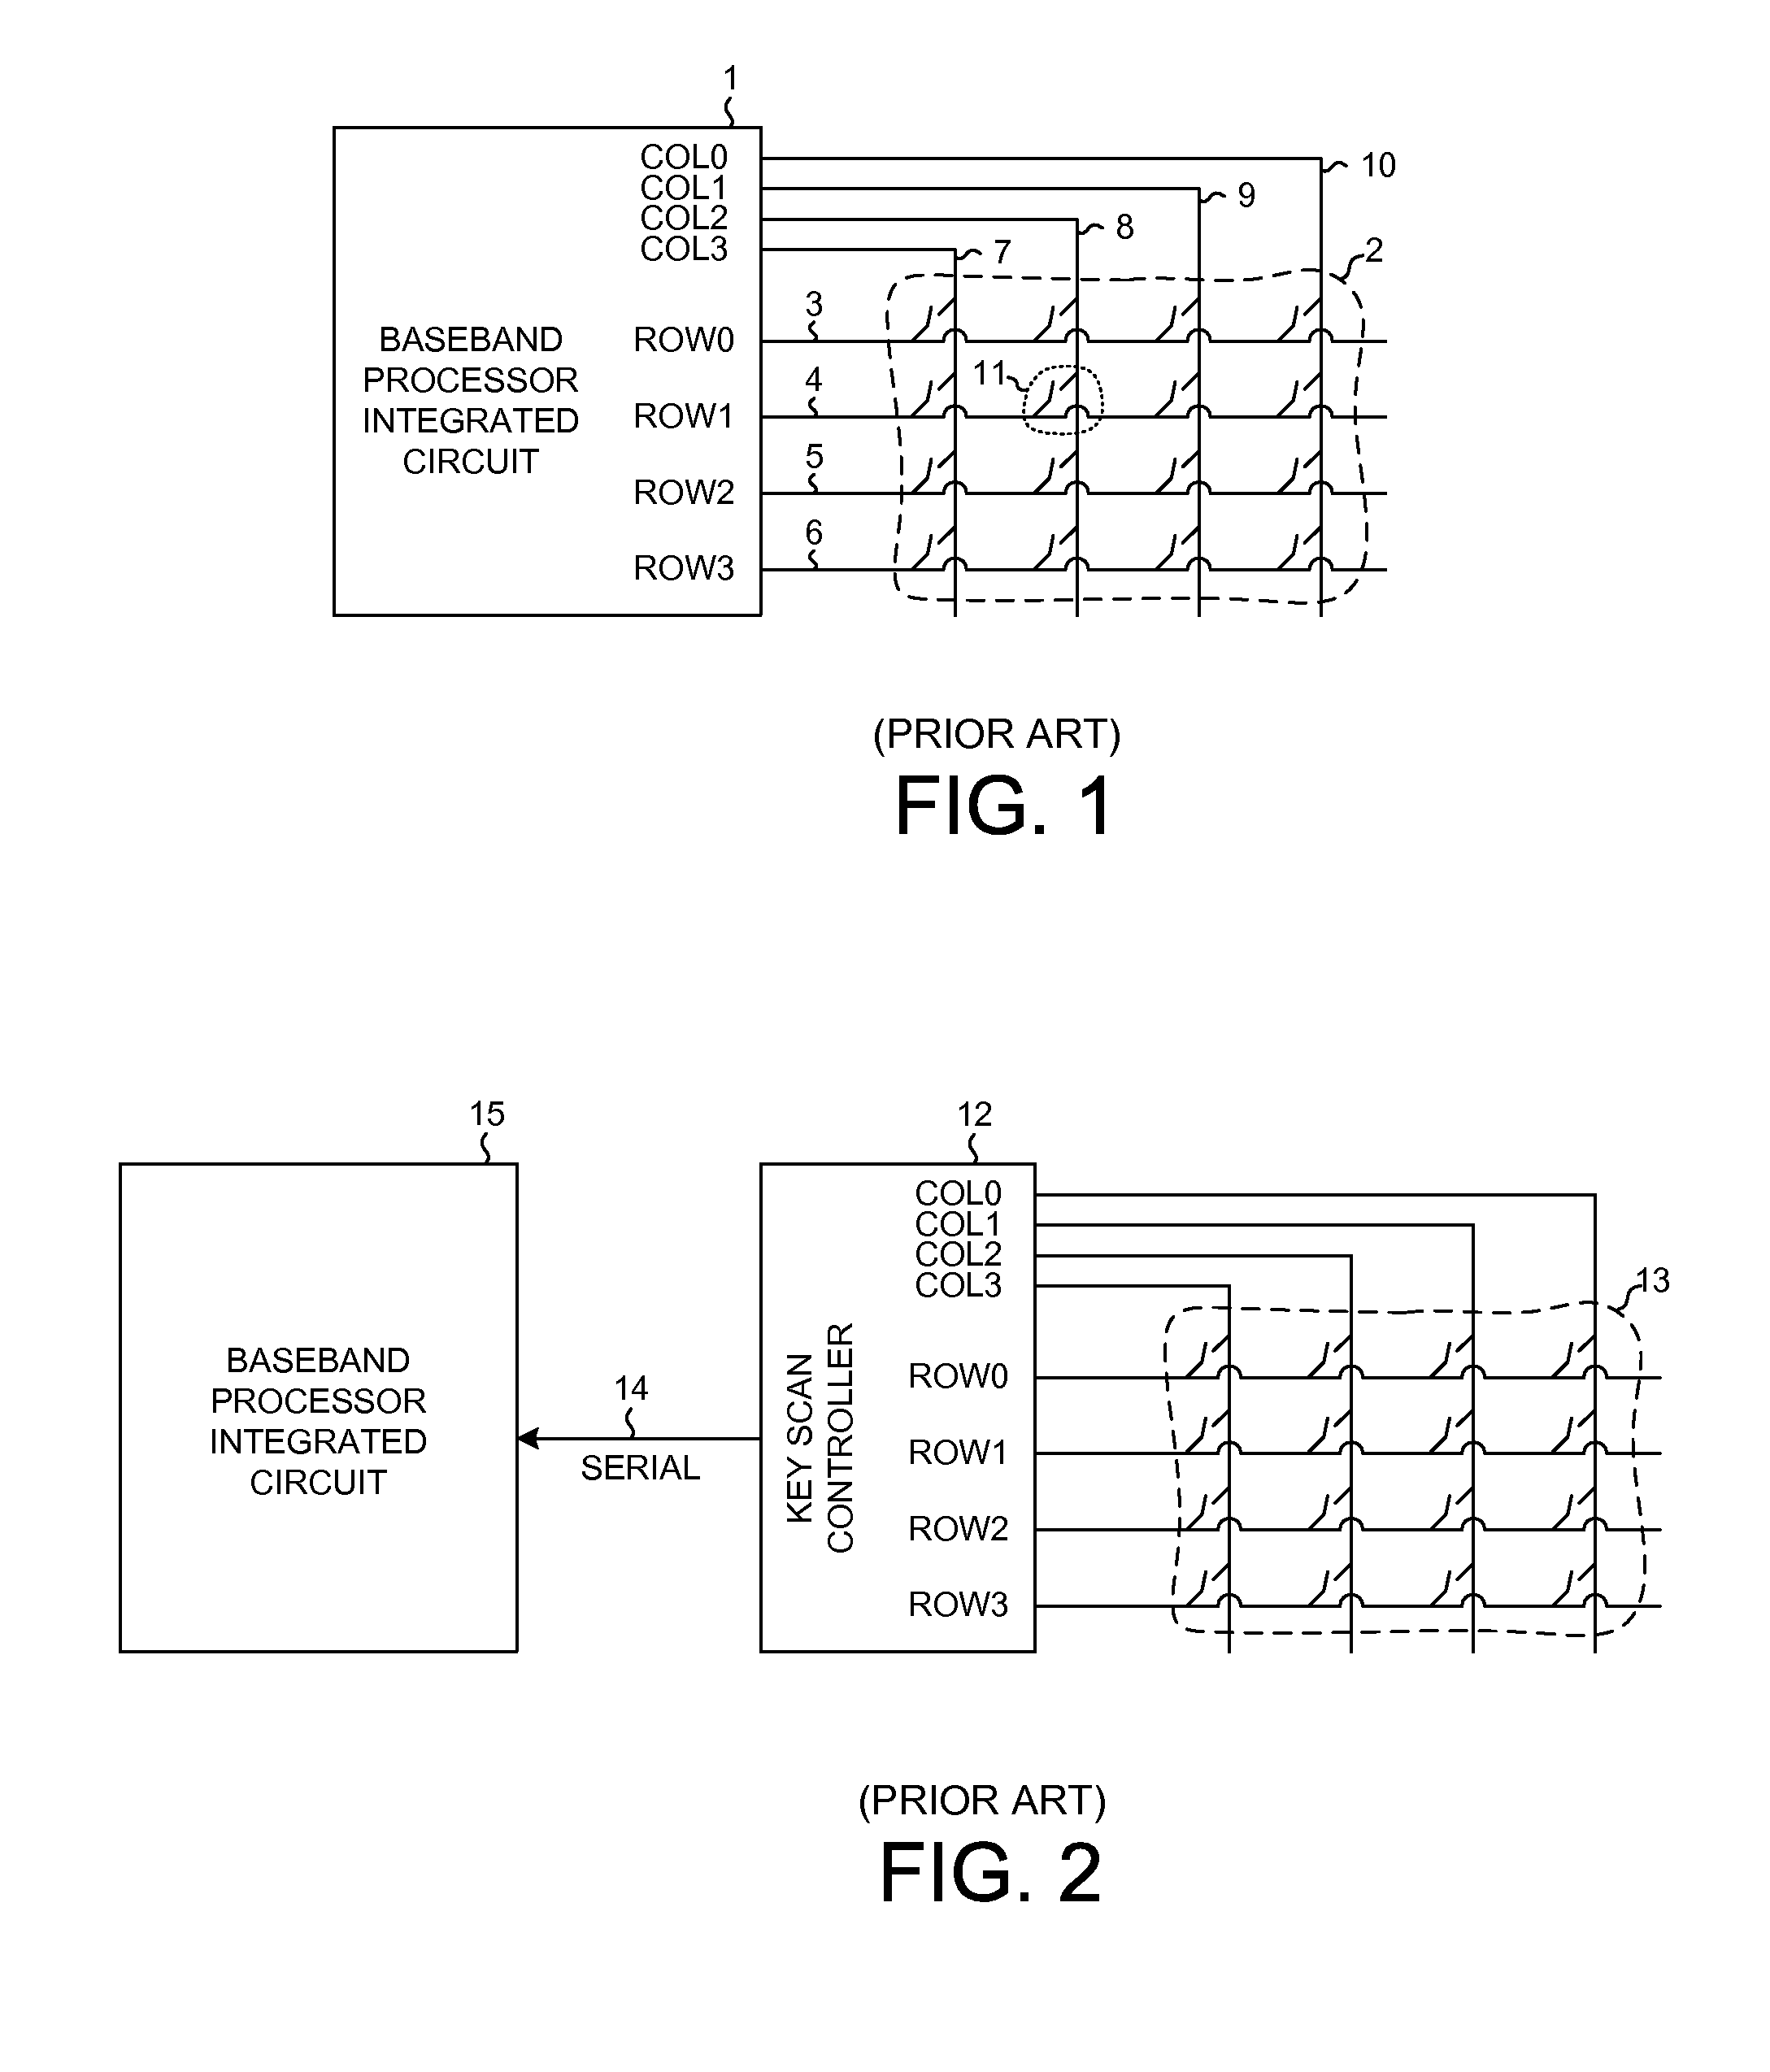 Two-Wire Connection to a Key Matrix in a Mobile Device